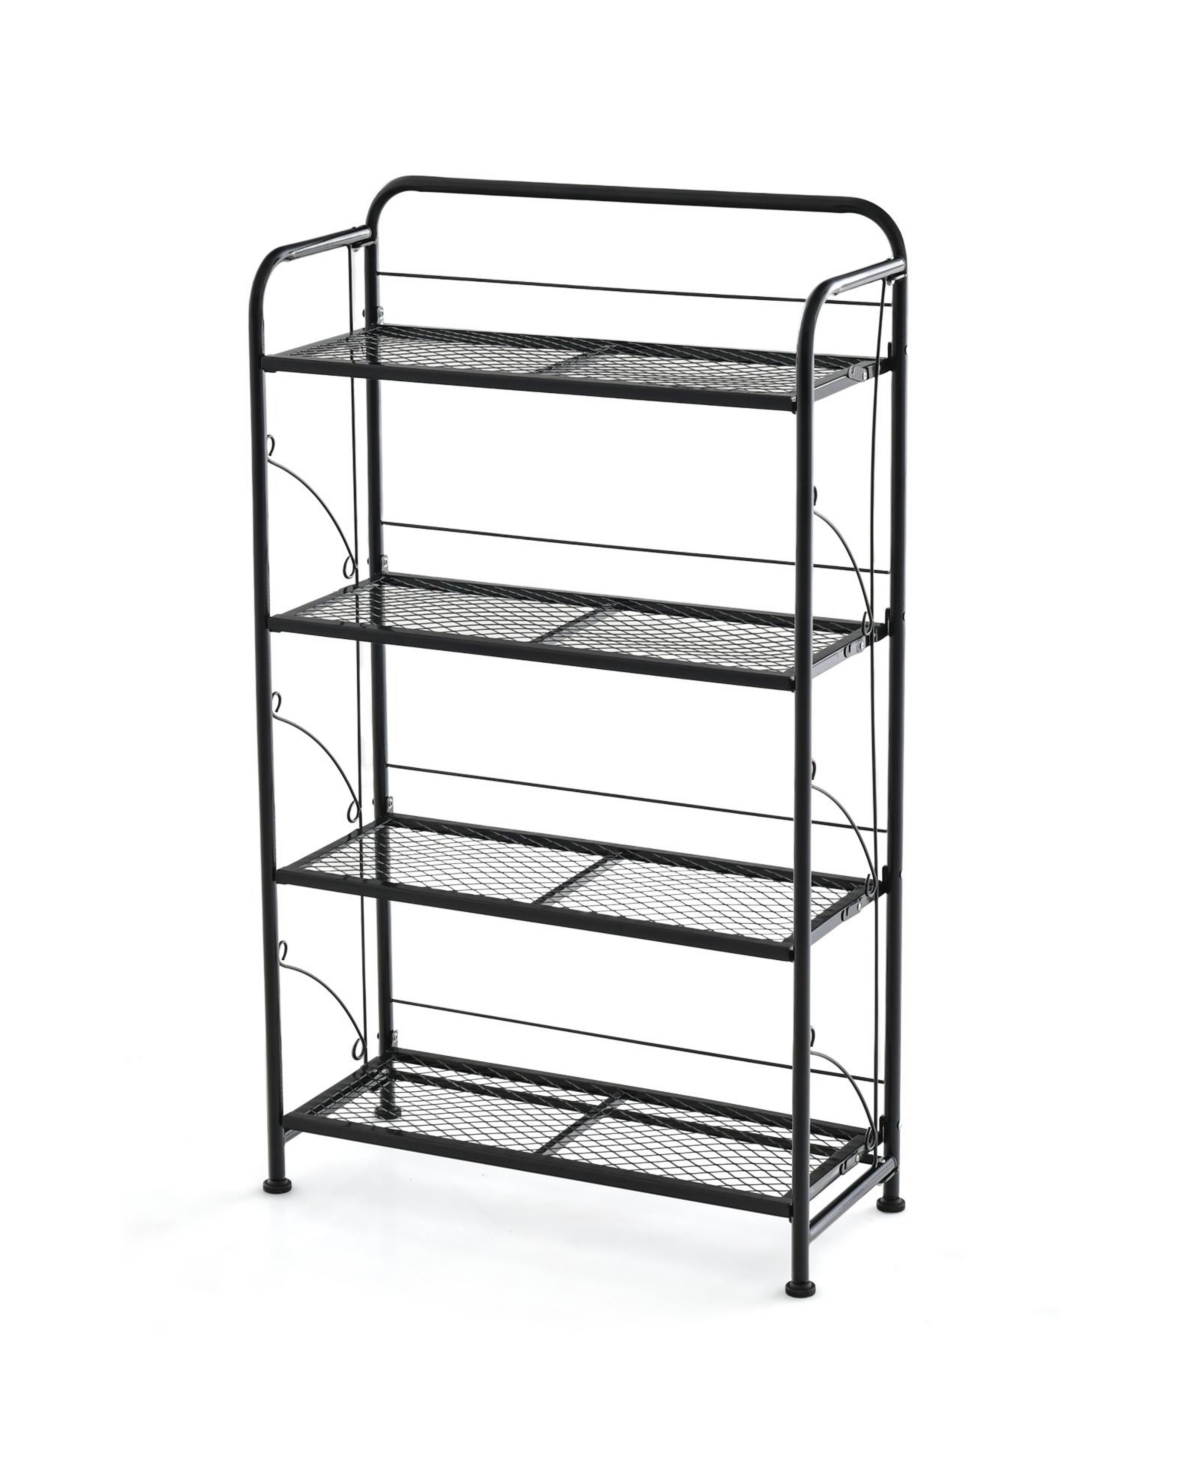 4-Tier Folding Plant Stand with Adjustable Shelf and Feet - Black